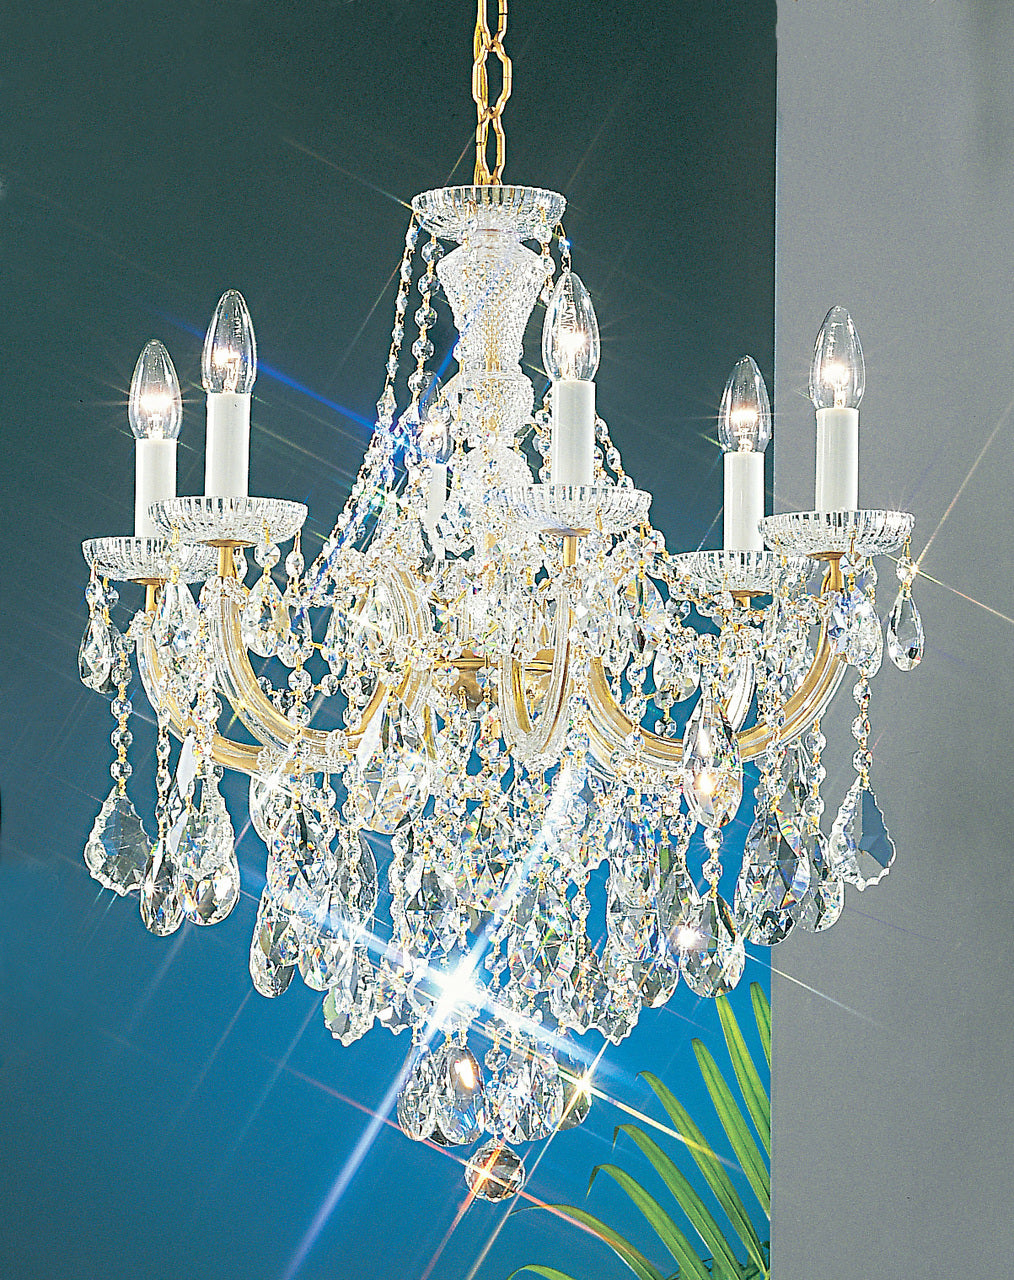 Classic Lighting 8121 OWG SC Maria Theresa Traditional Crystal Chandelier in Olde World Gold (Imported from Italy)